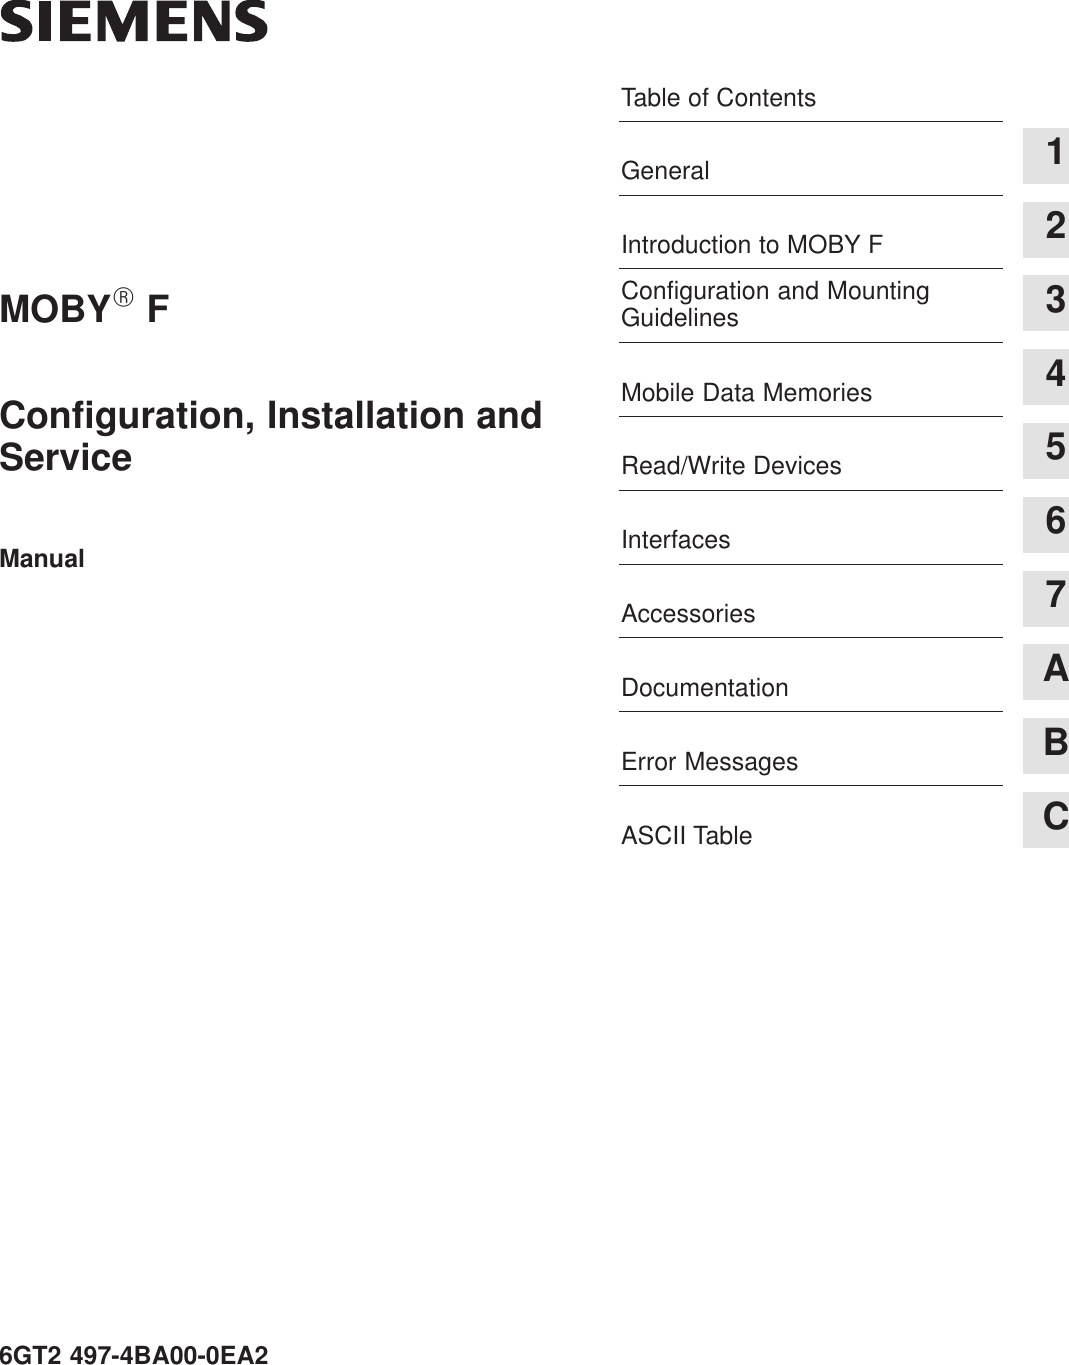 Table of ContentsGeneral 1Introduction to MOBY F 2Configuration and MountingGuidelines 3Mobile Data Memories 4Read/Write Devices 5Interfaces 6Accessories 7Documentation AError Messages BASCII Table C6GT2 497-4BA00-0EA2Configuration, Installation andServiceManualMOBYR F